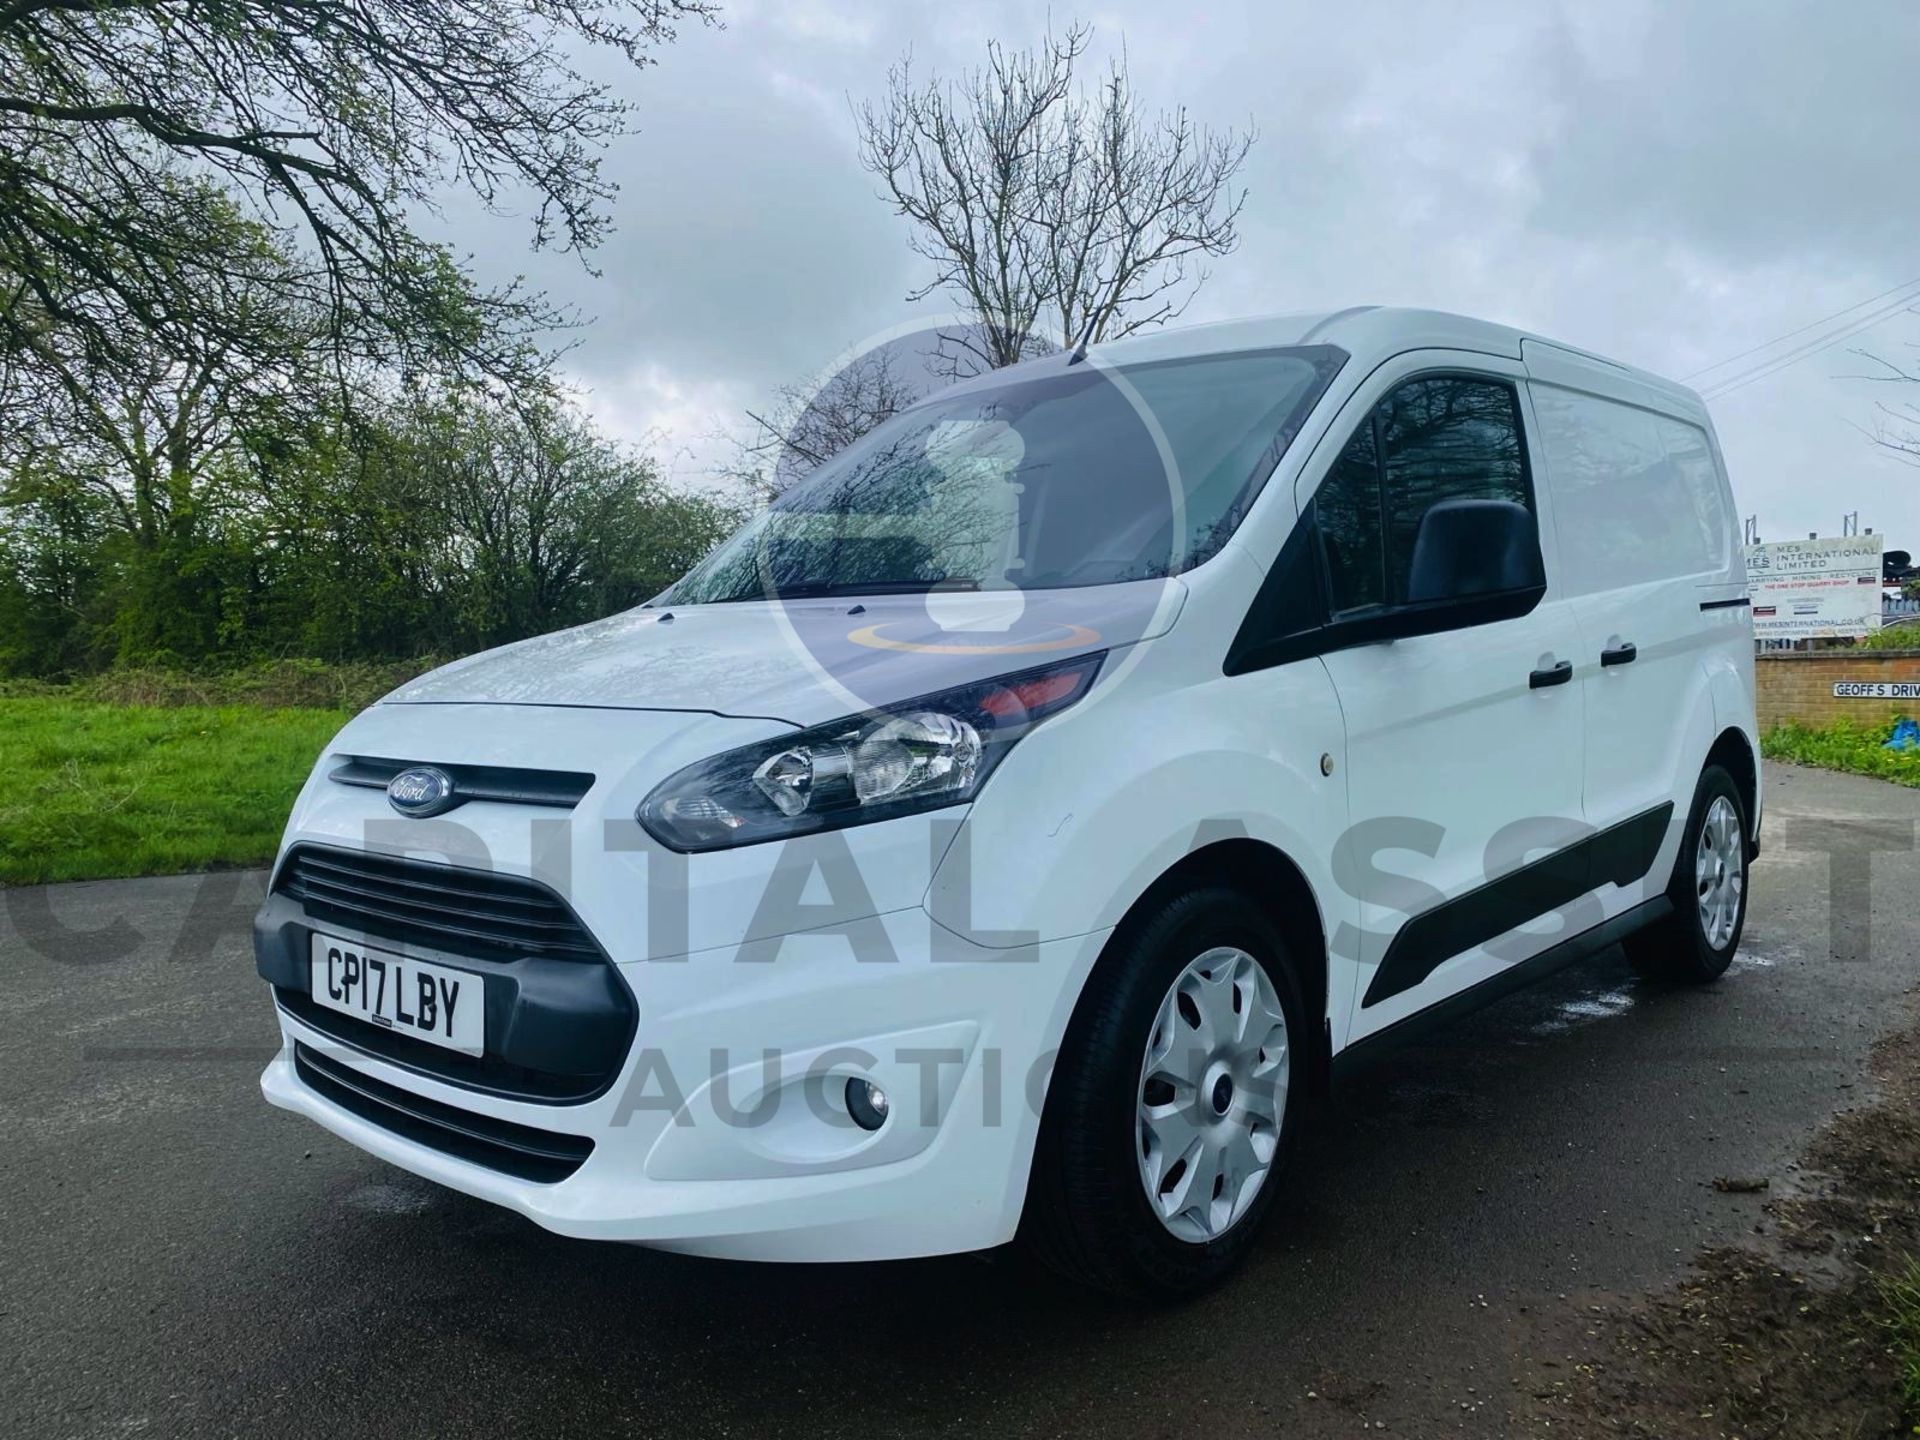 (ON SALE) FORD TRANSIT CONNECT *TREND EDITION* SWB PANEL VAN (2017 - EURO 6) 1.5 TDCI - Image 2 of 24